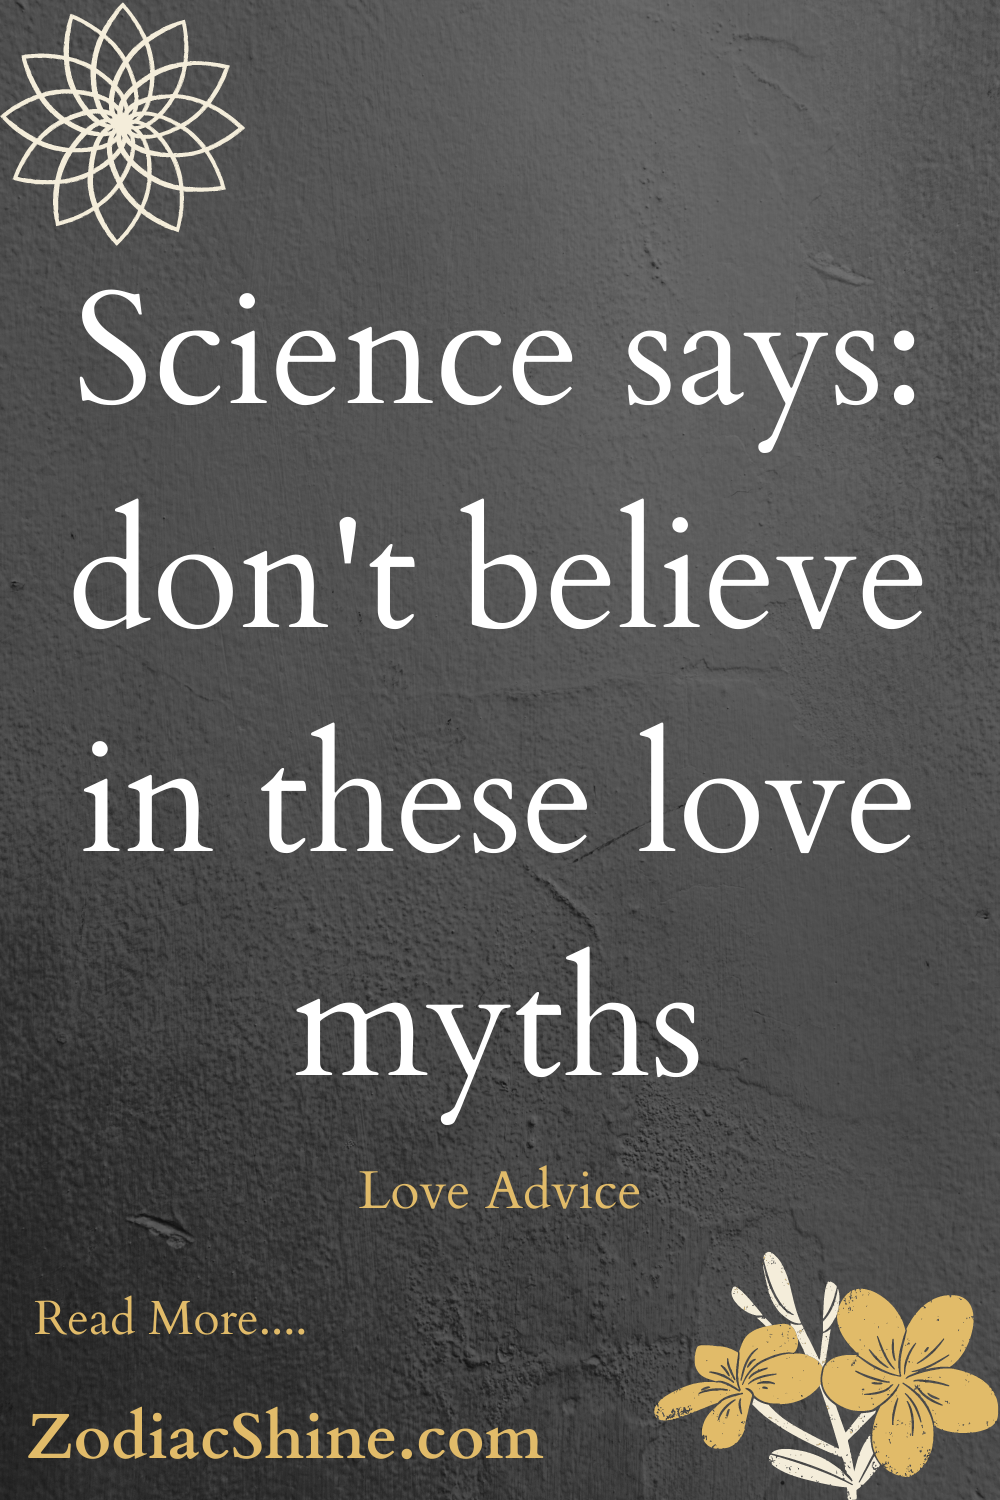 Science says: don't believe in these love myths